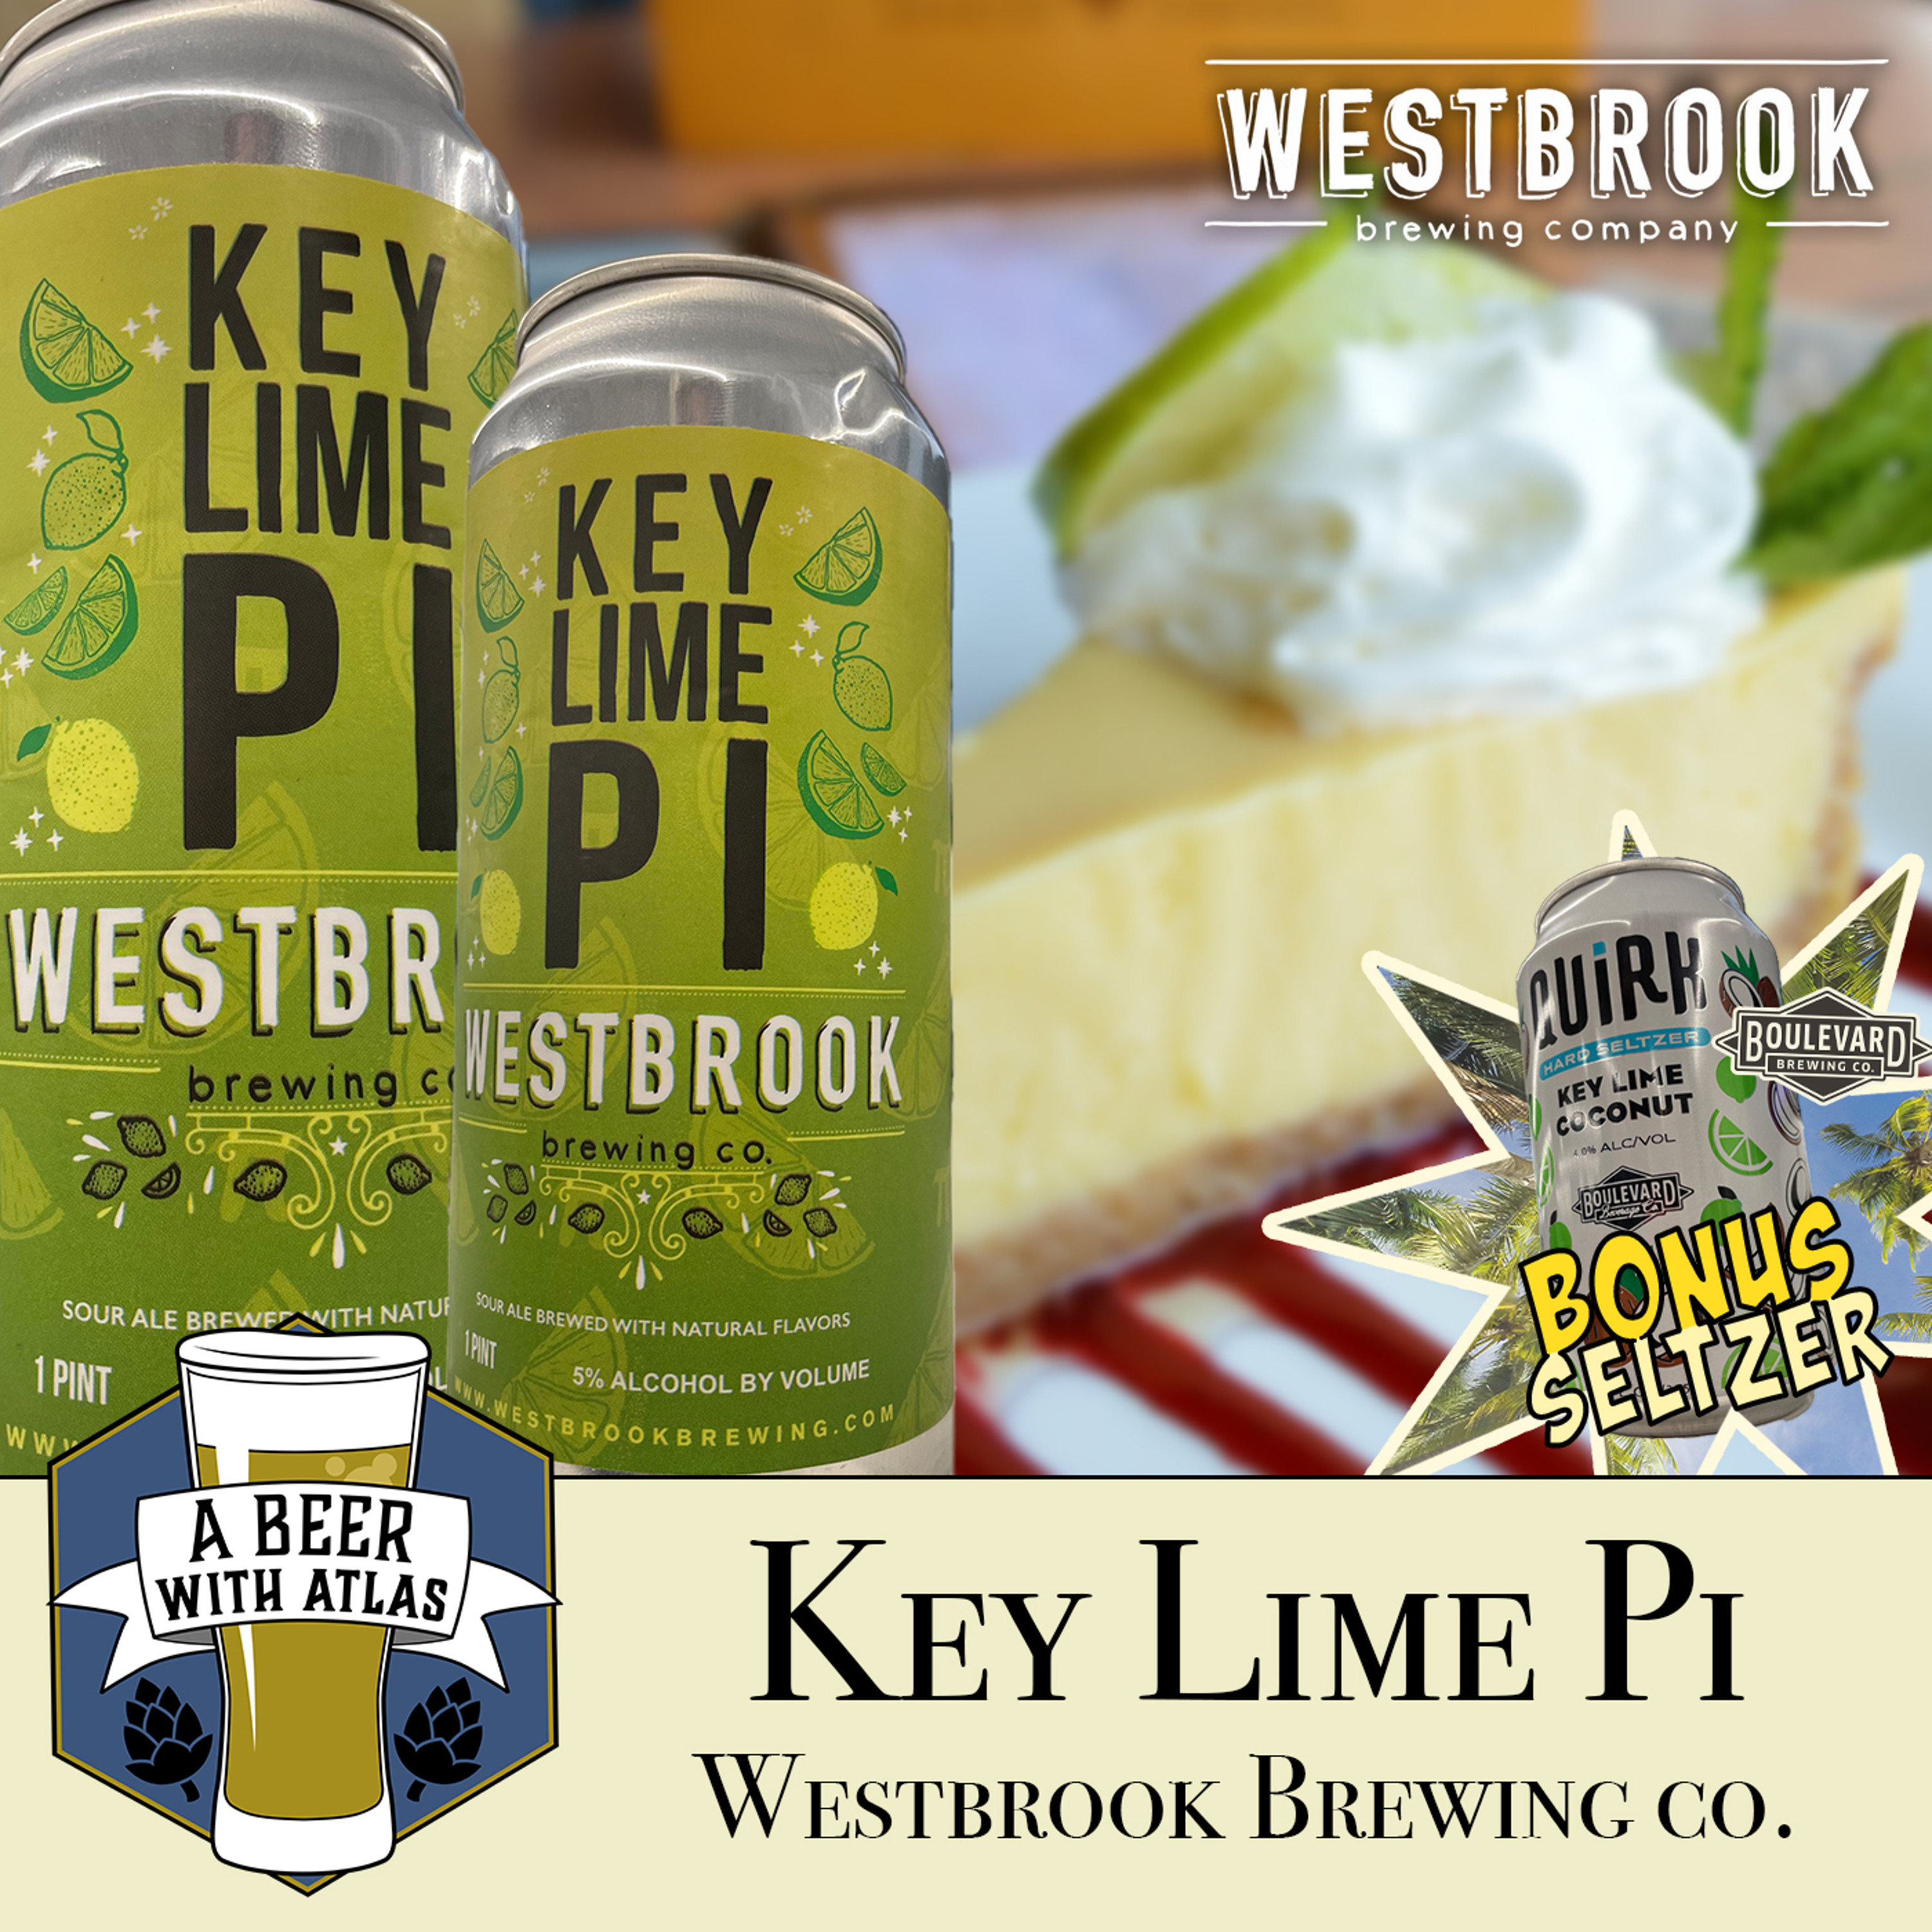 Pi Day | Key Lime Pi from Westbrook Brewing - A Beer with Atlas 186